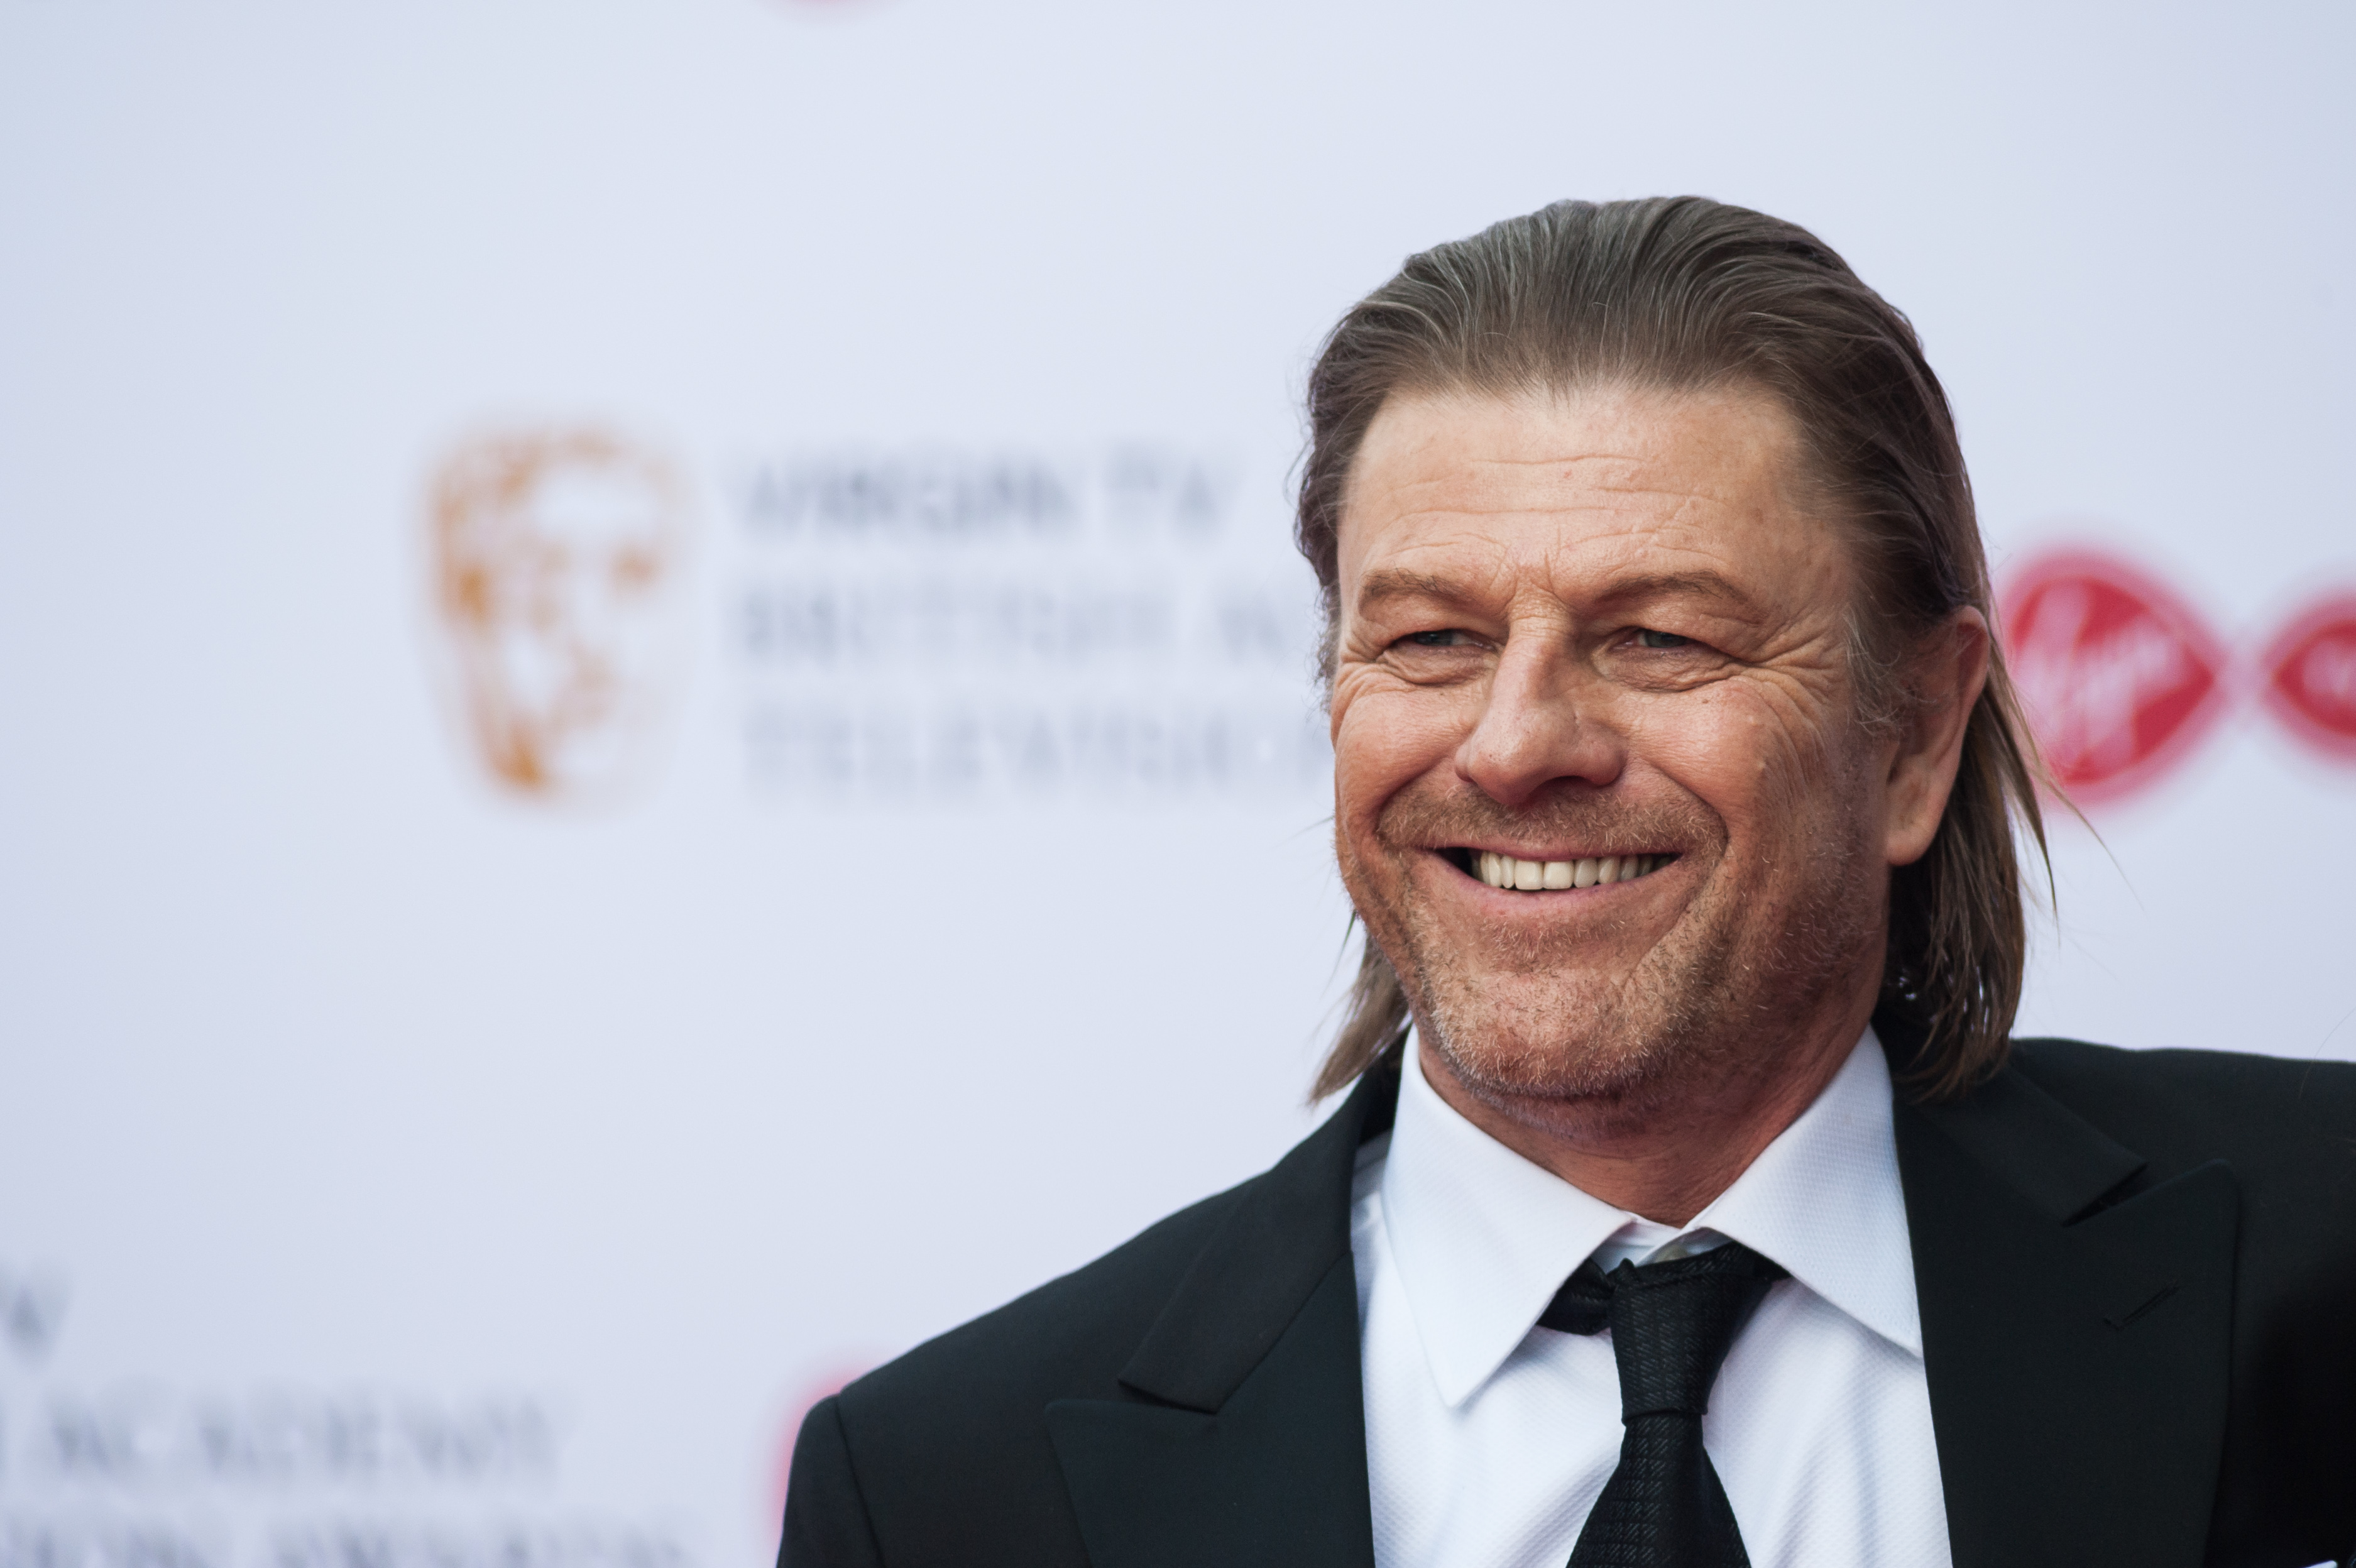 Sean Bean attends the Virgin TV British Academy Television Awards ceremony at the Royal Festival Hall on May 14, 2017 in London, United Kingdom. (Wiktor Szymanowic—Barcroft Media/Getty Images)